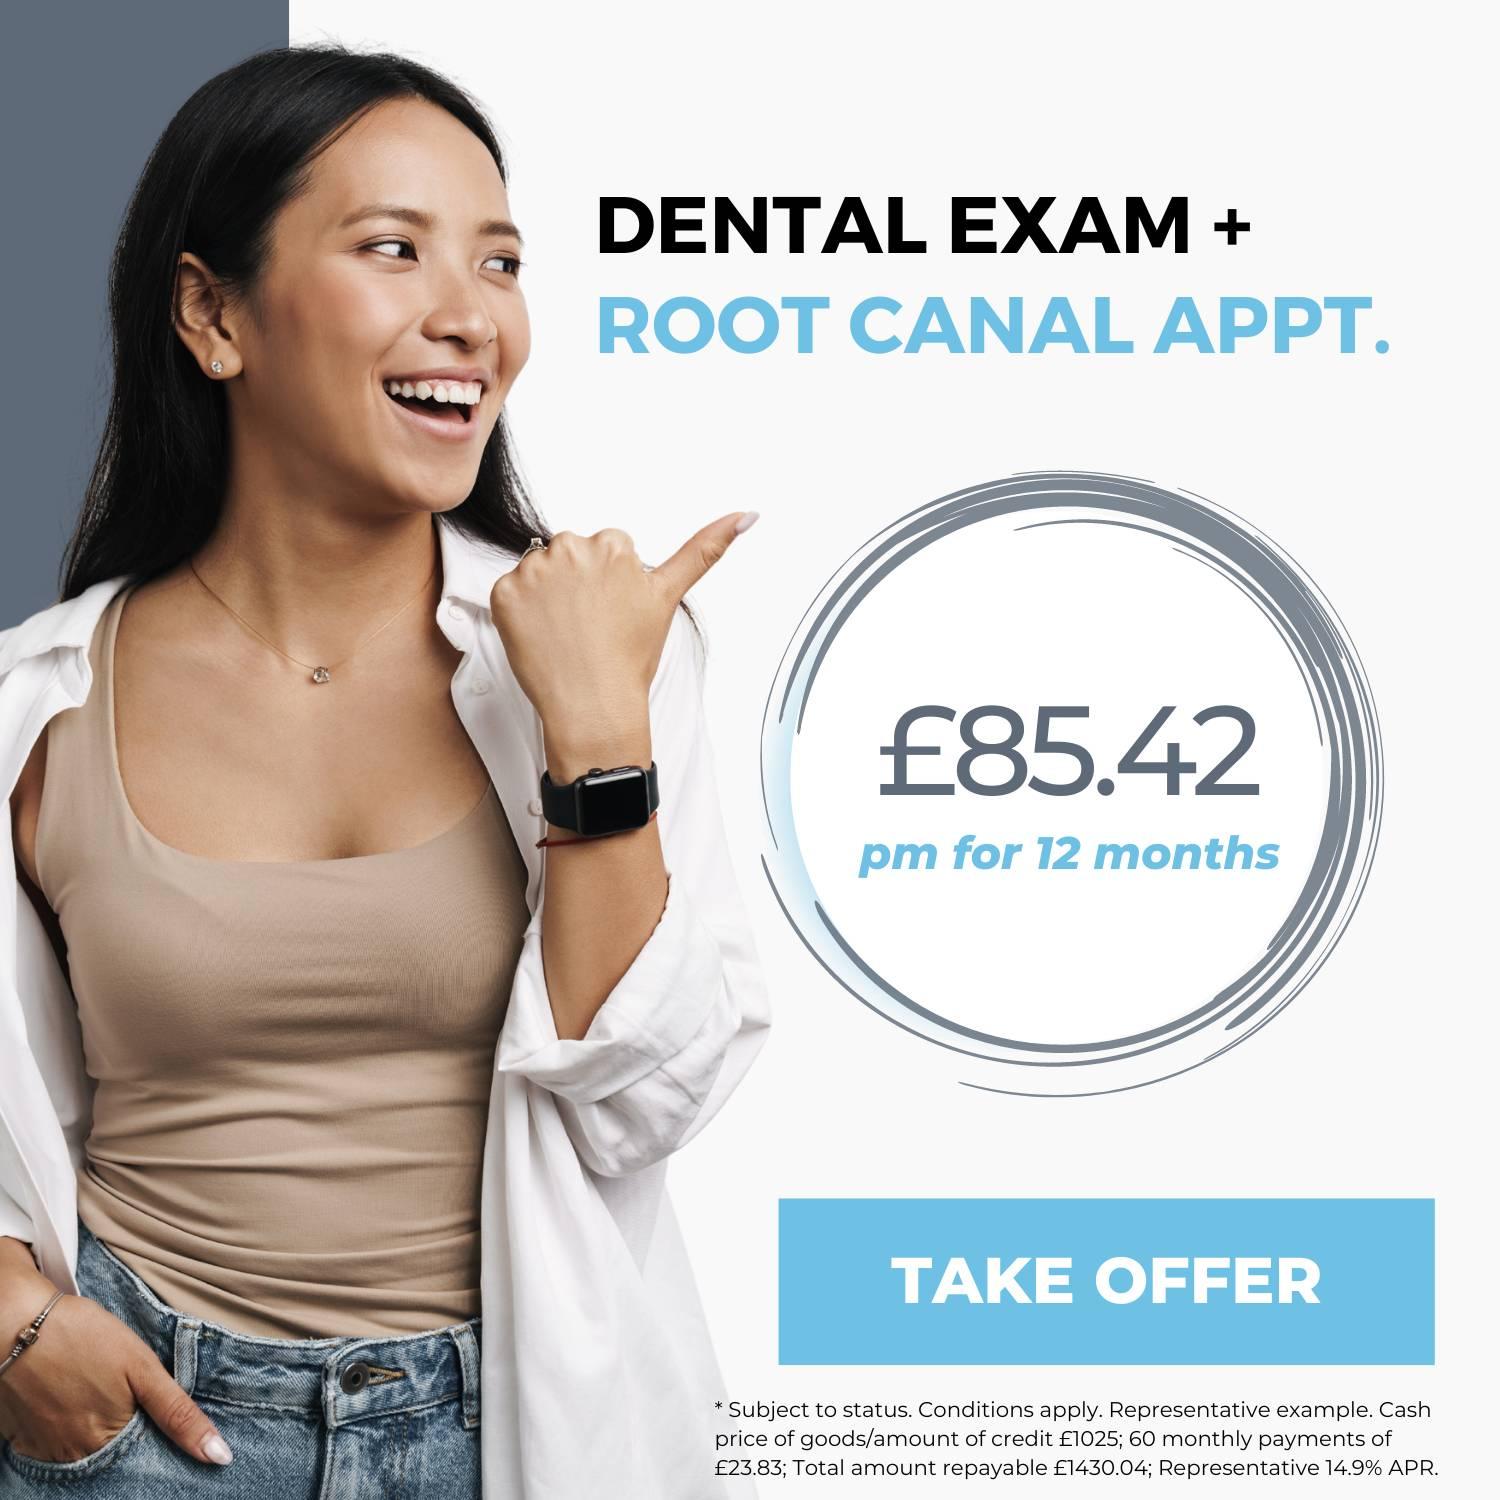 exam + root canal offer image